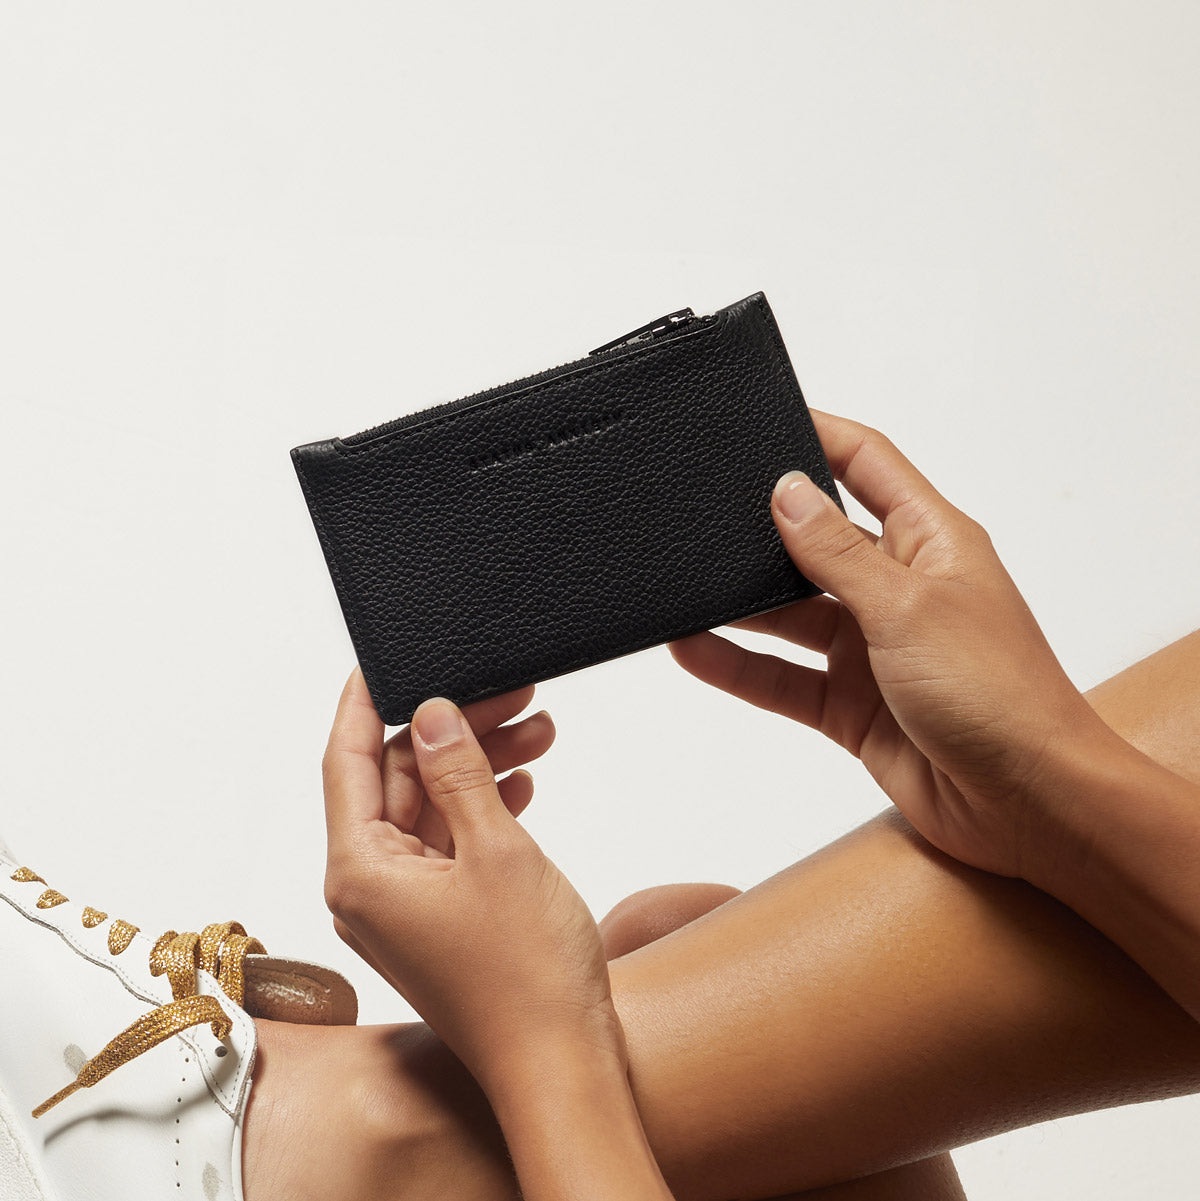 Avoiding Things Women's Black Leather Wallet | Status Anxiety®